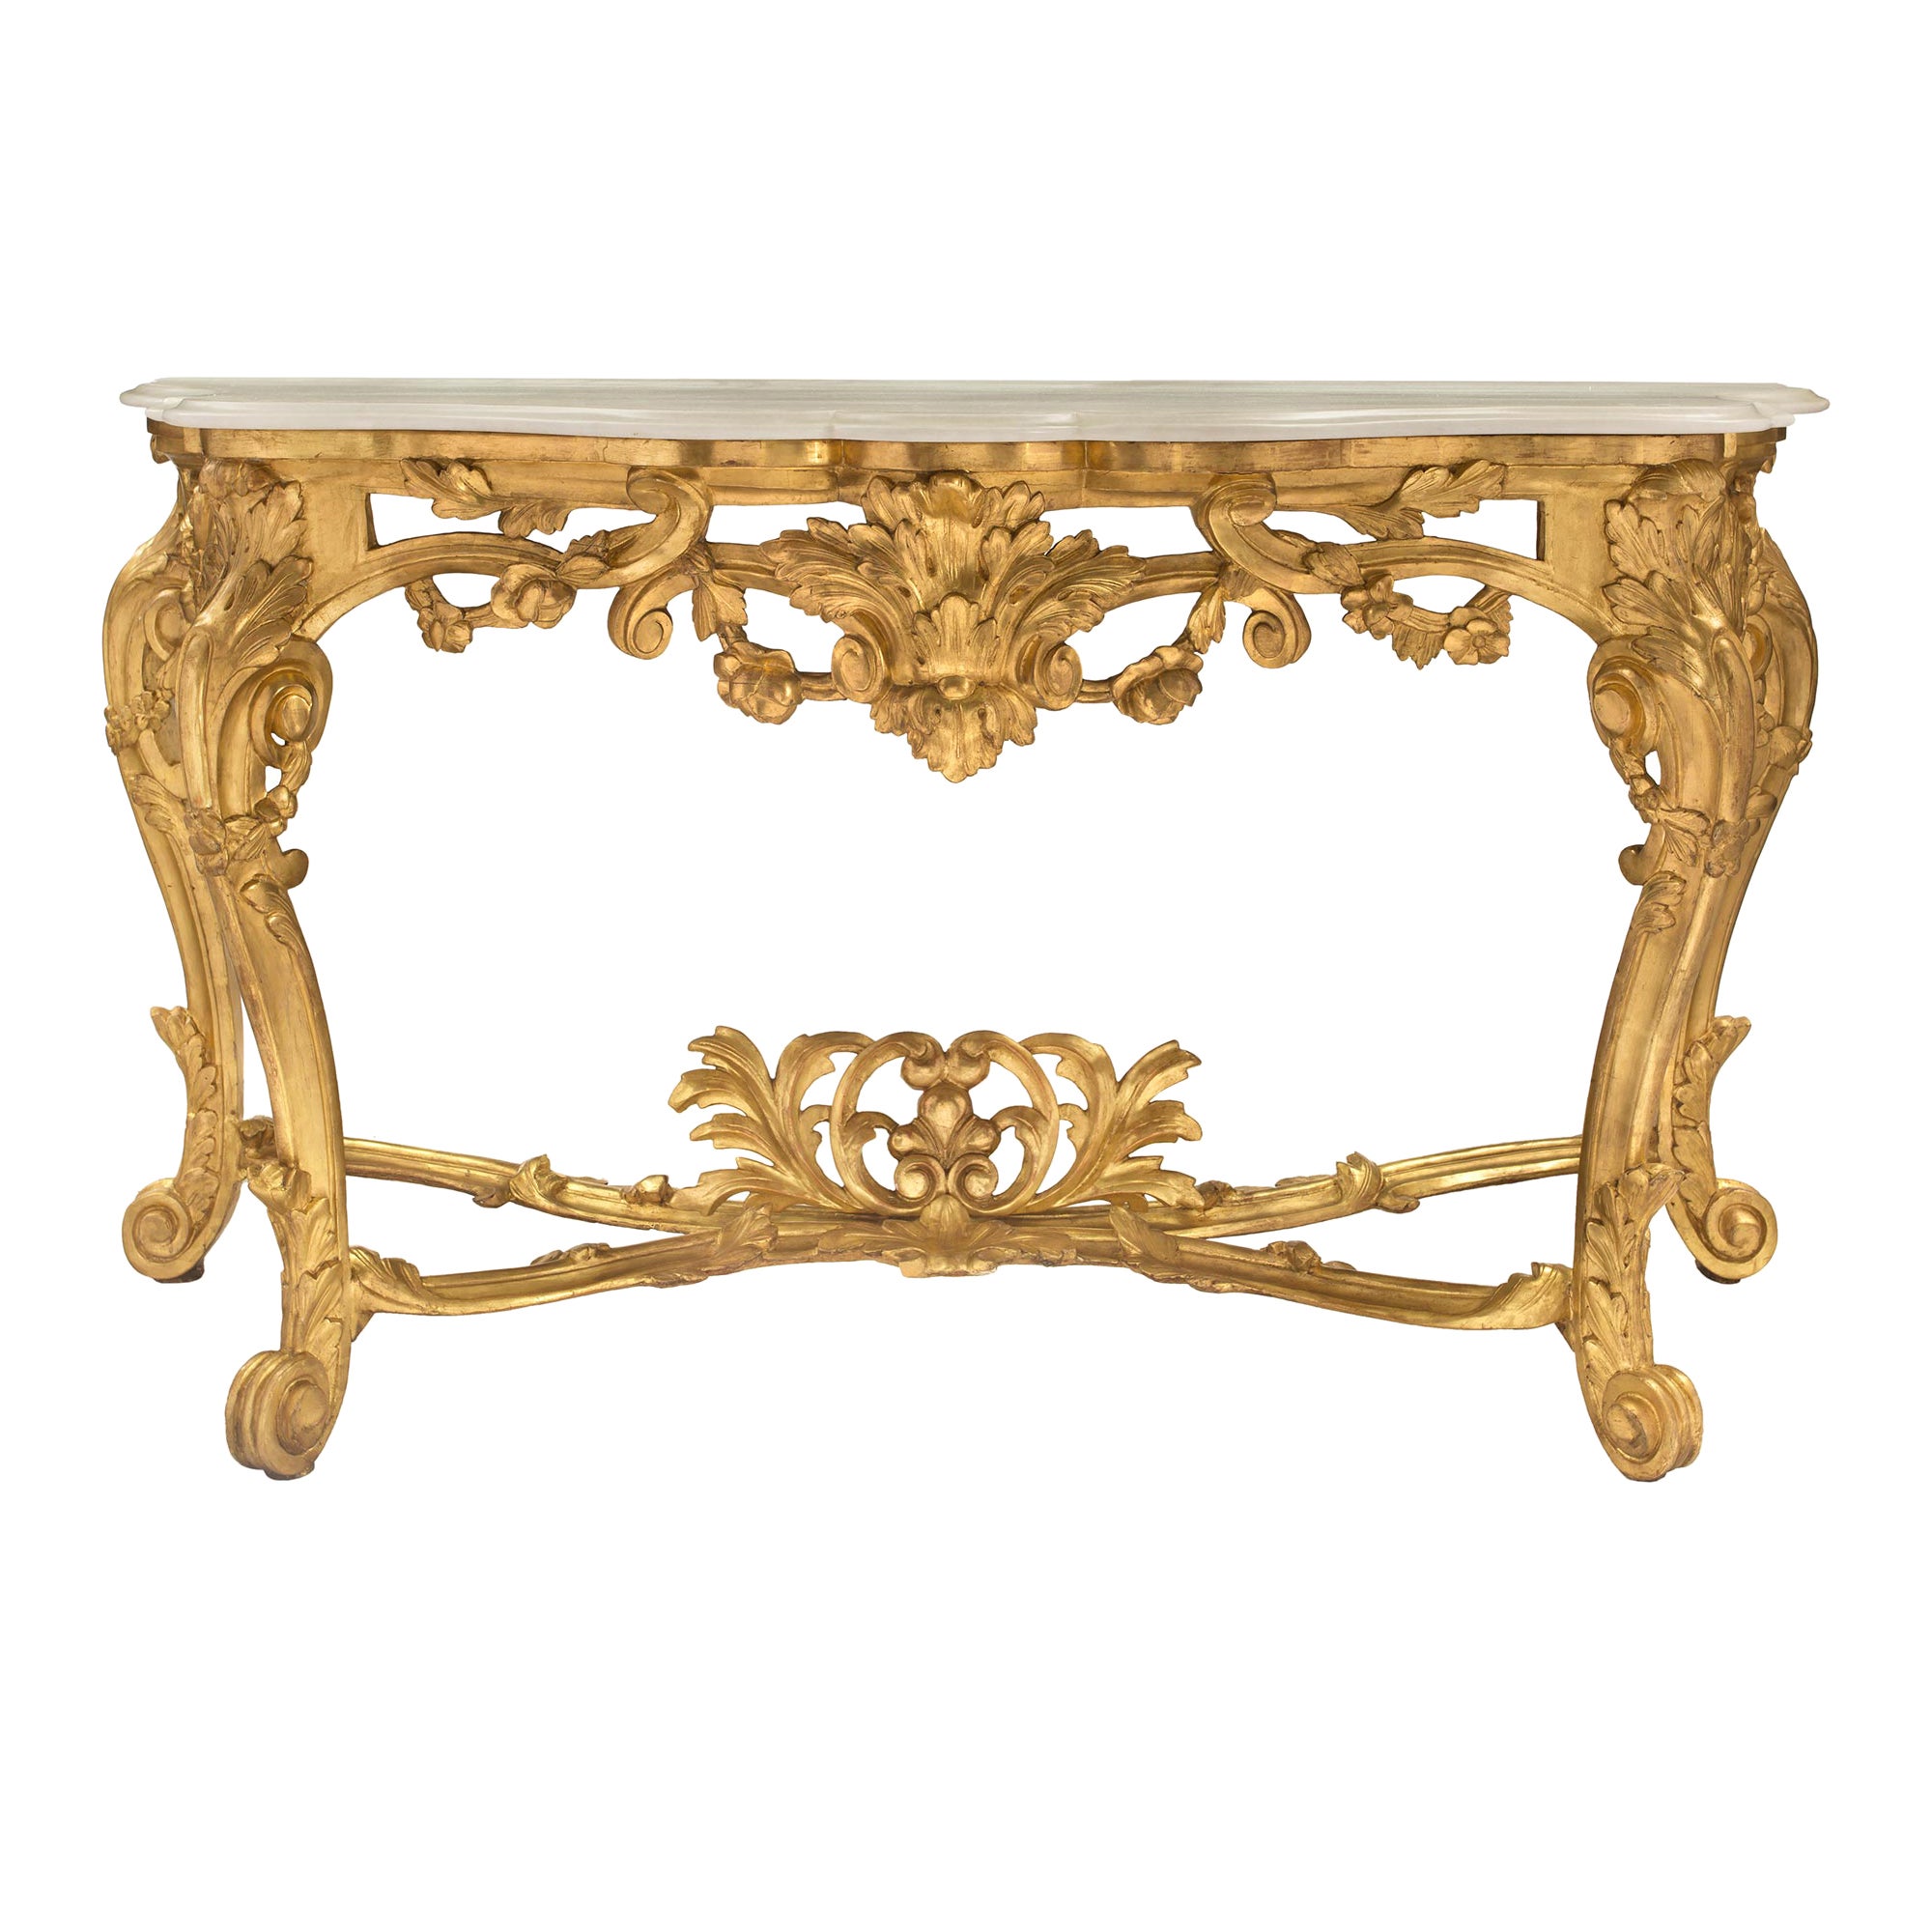 Italian Early 19th Century Louis XV Style Giltwood and Carrara Marble Console